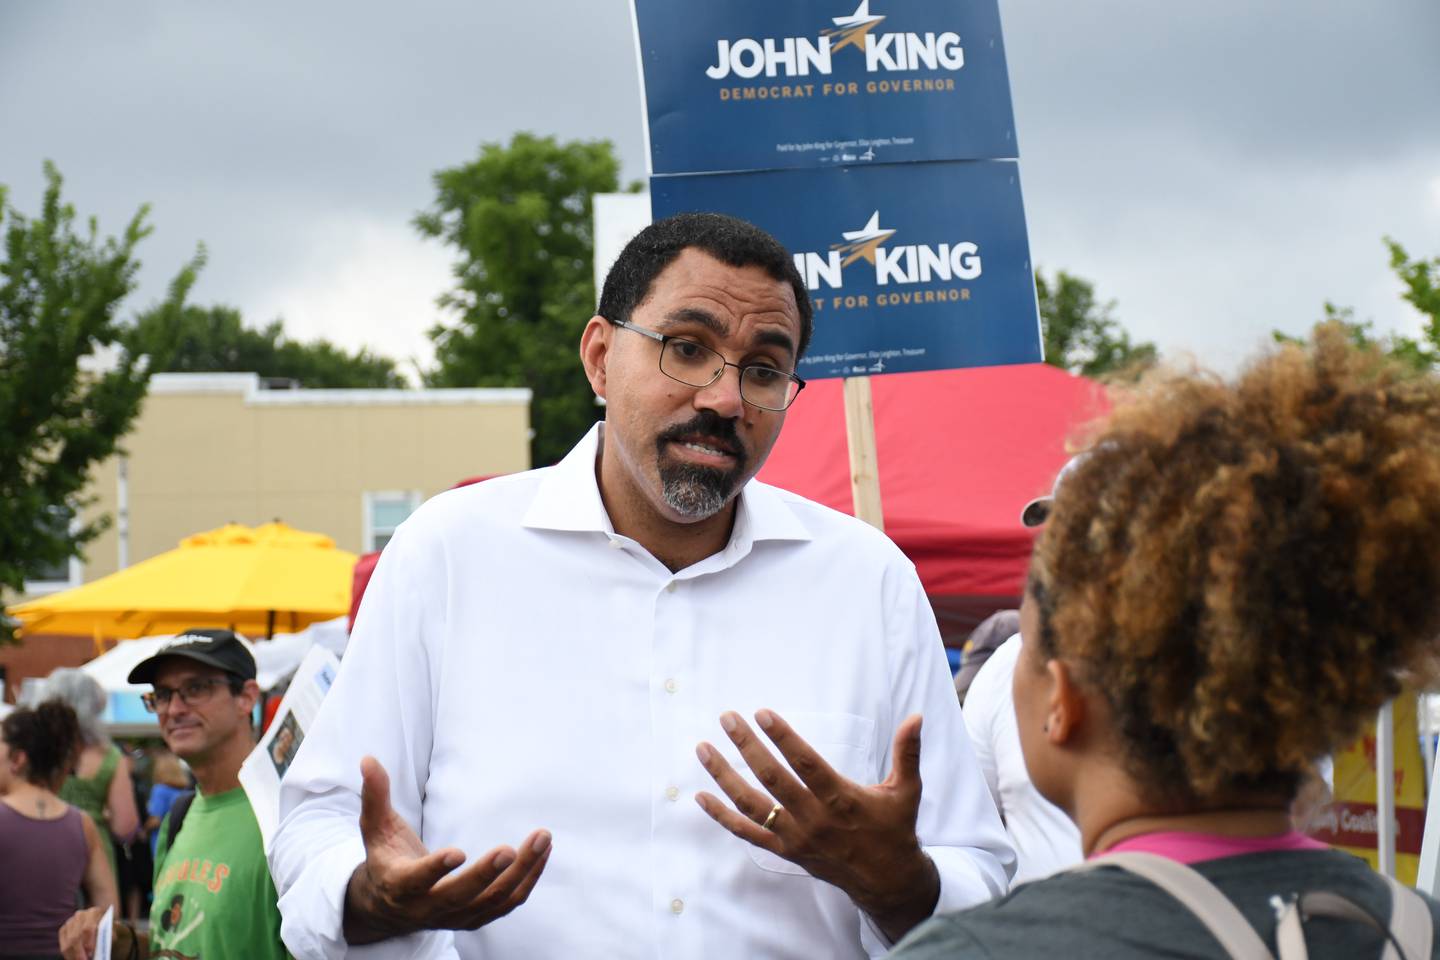 Maryland Democratic candidate for governor John King talks with voters at a farmers market in Baltimore's Waverly neighborhood on Saturday, July 16, 2022.